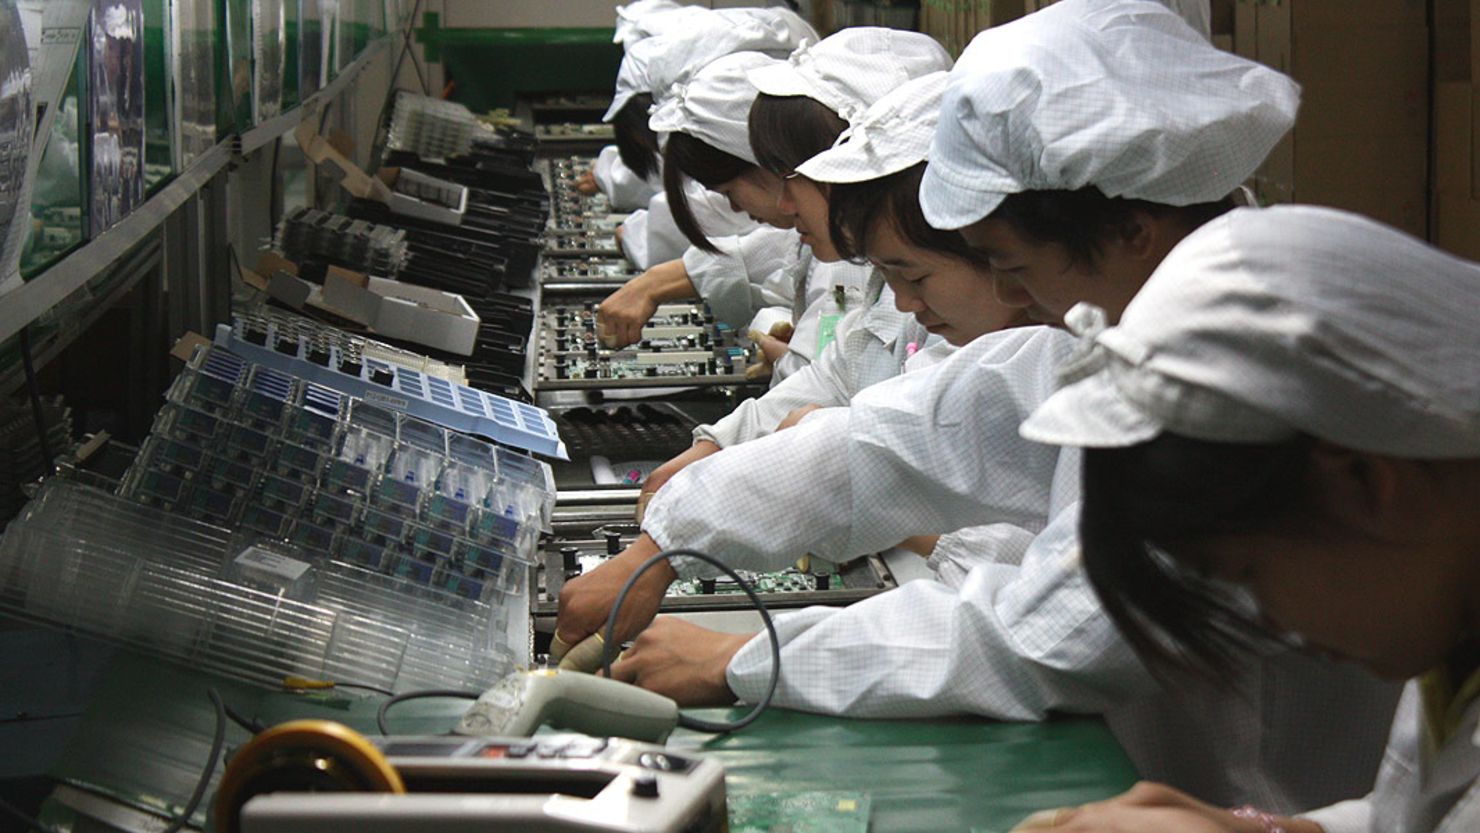 Workers labor on a production line at Foxconn's Longhua plant, which employs 300,000 people and makes products for Apple.